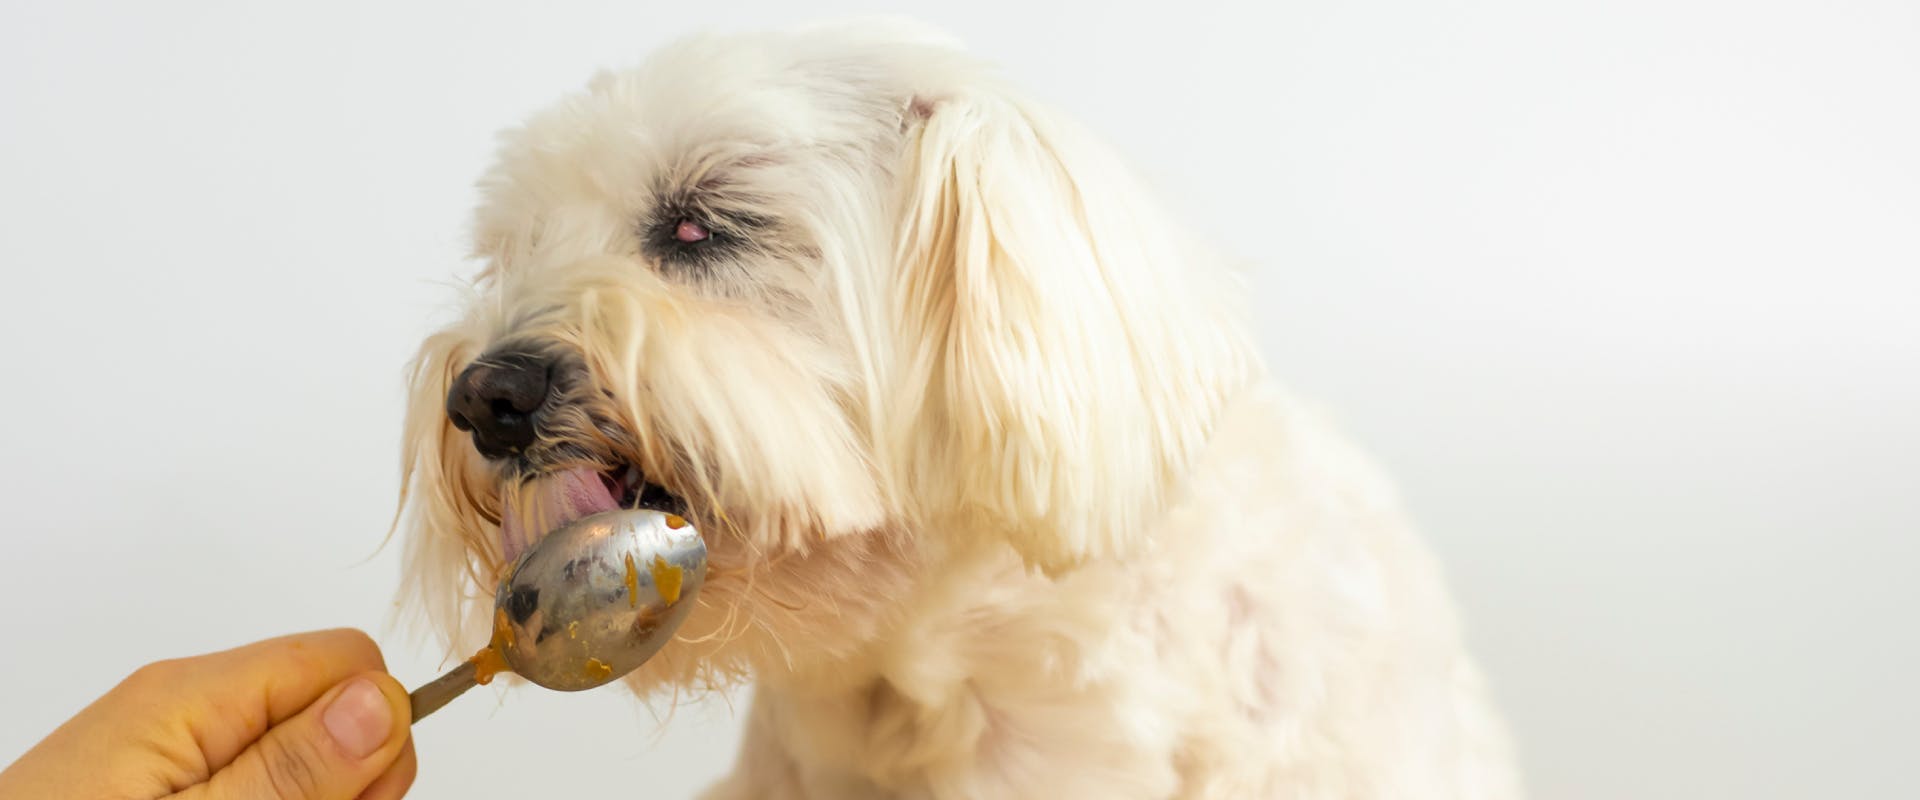 A dog eats peanut butter from a spoon.